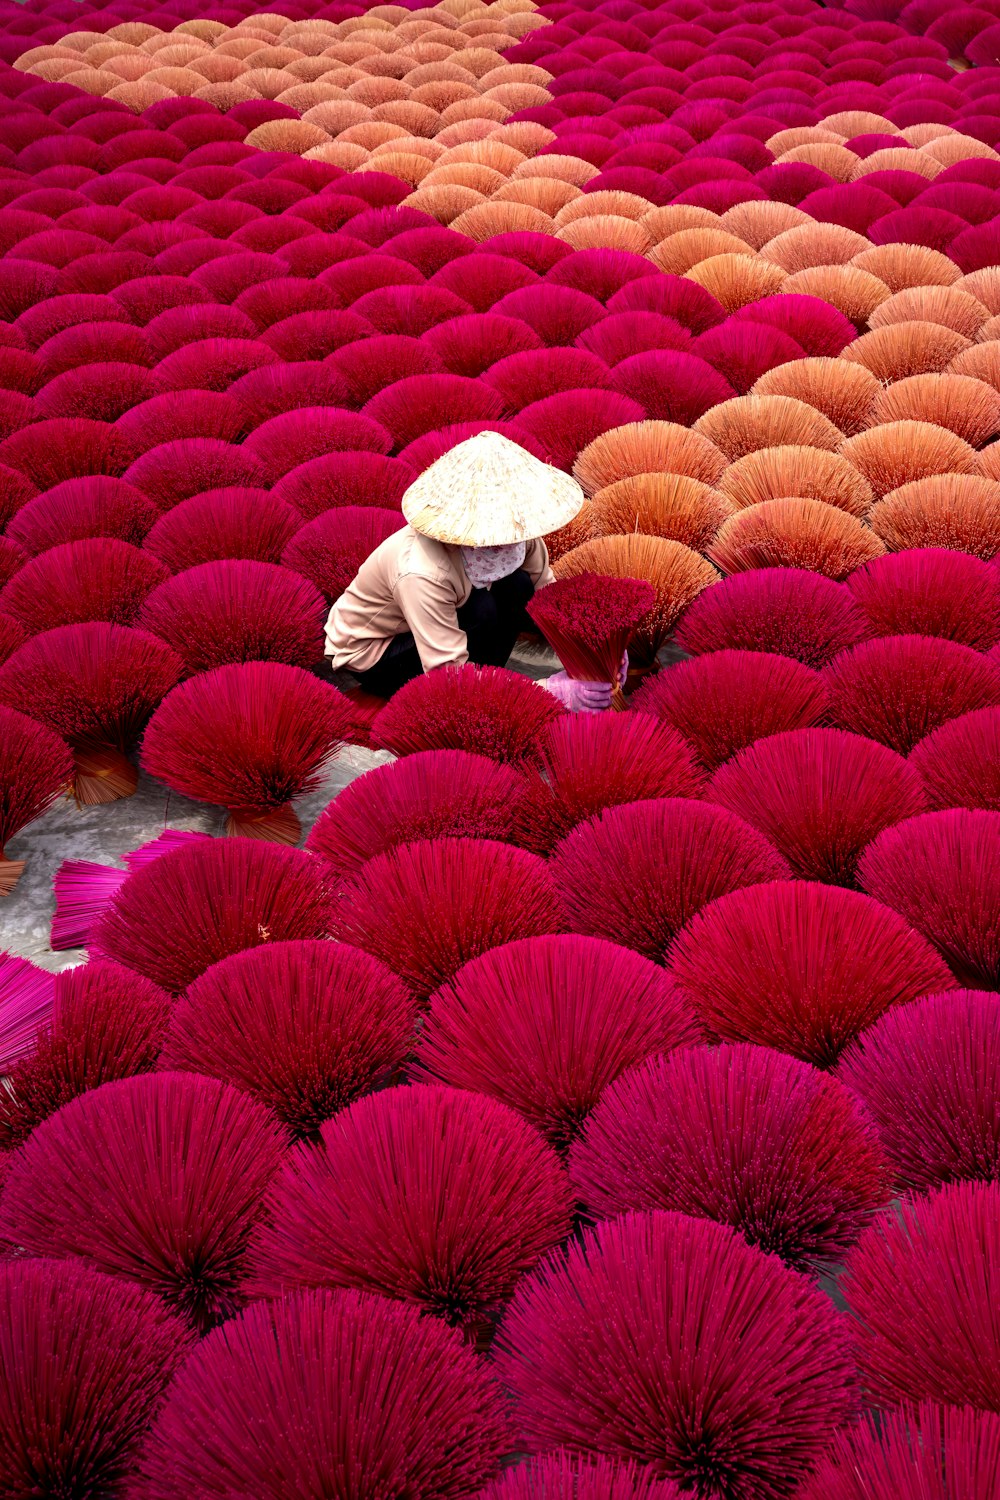 a person kneeling down in a field of red and orange umbrellas